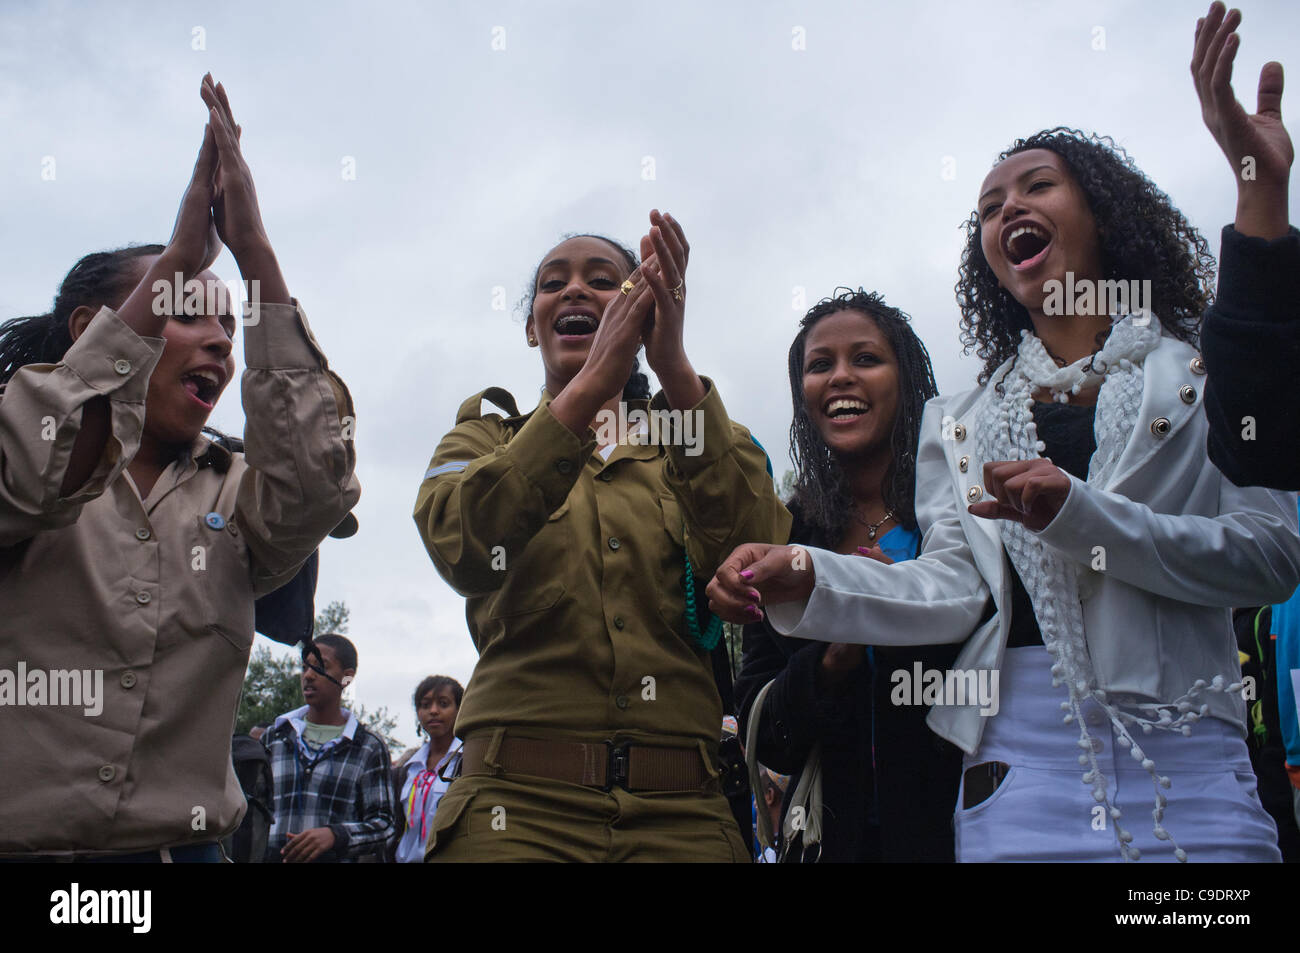 Young women, including Ethiopian IDF soldiers, dance in a women-only dance circle celebrating the Sigd Holiday, symbolizing their yearning for Jerusalem, at the Sherover Promenade overlooking the Temple Mount. Jerusalem, Israel. 24th November 2011. Stock Photo